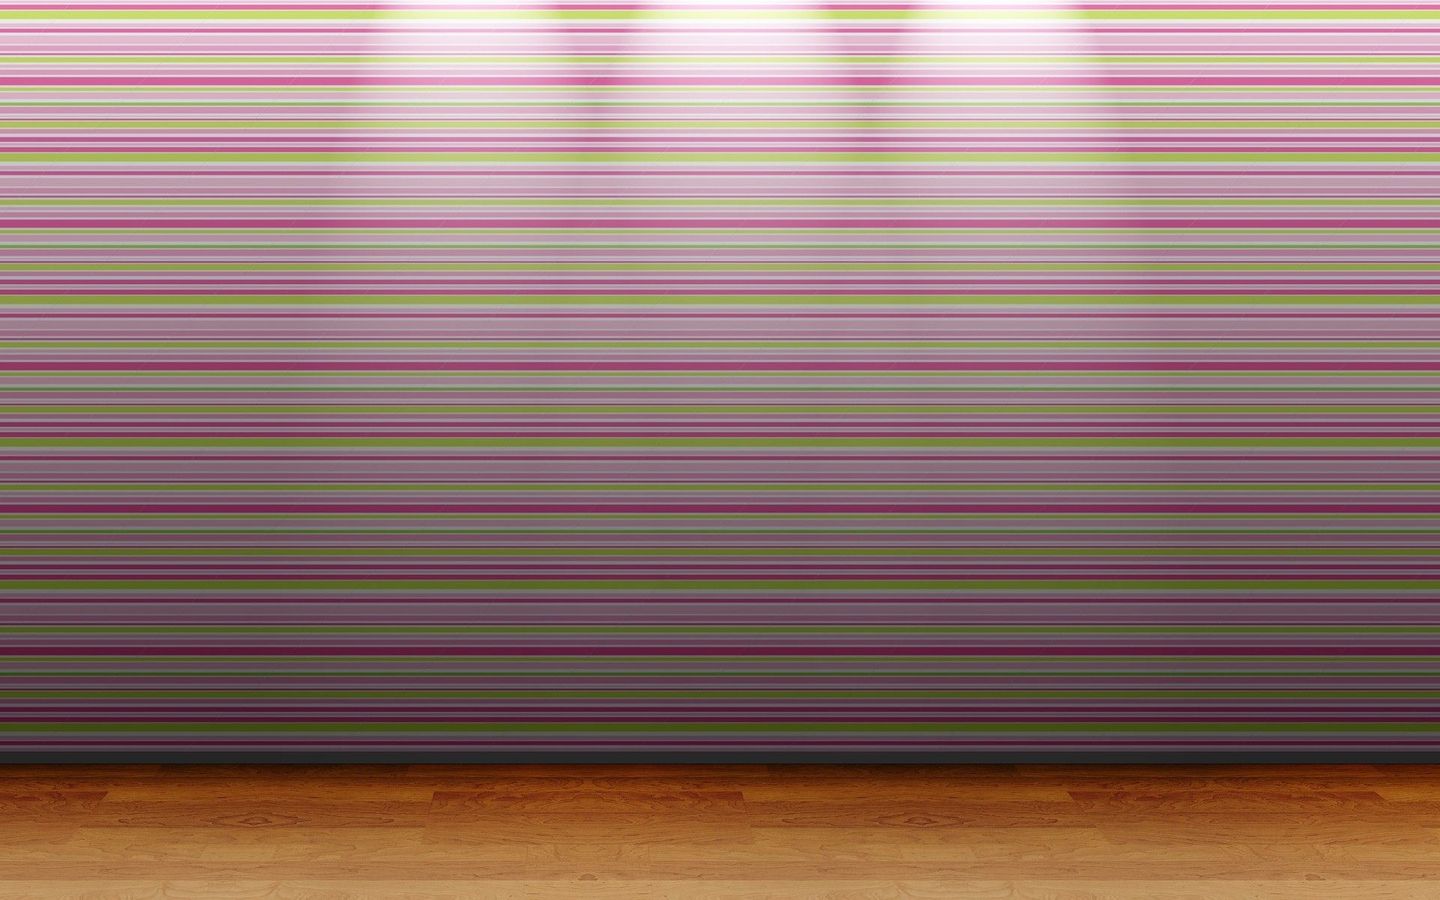 Pink Wall Stripes And Wood Floor Widescreen Wallpaper